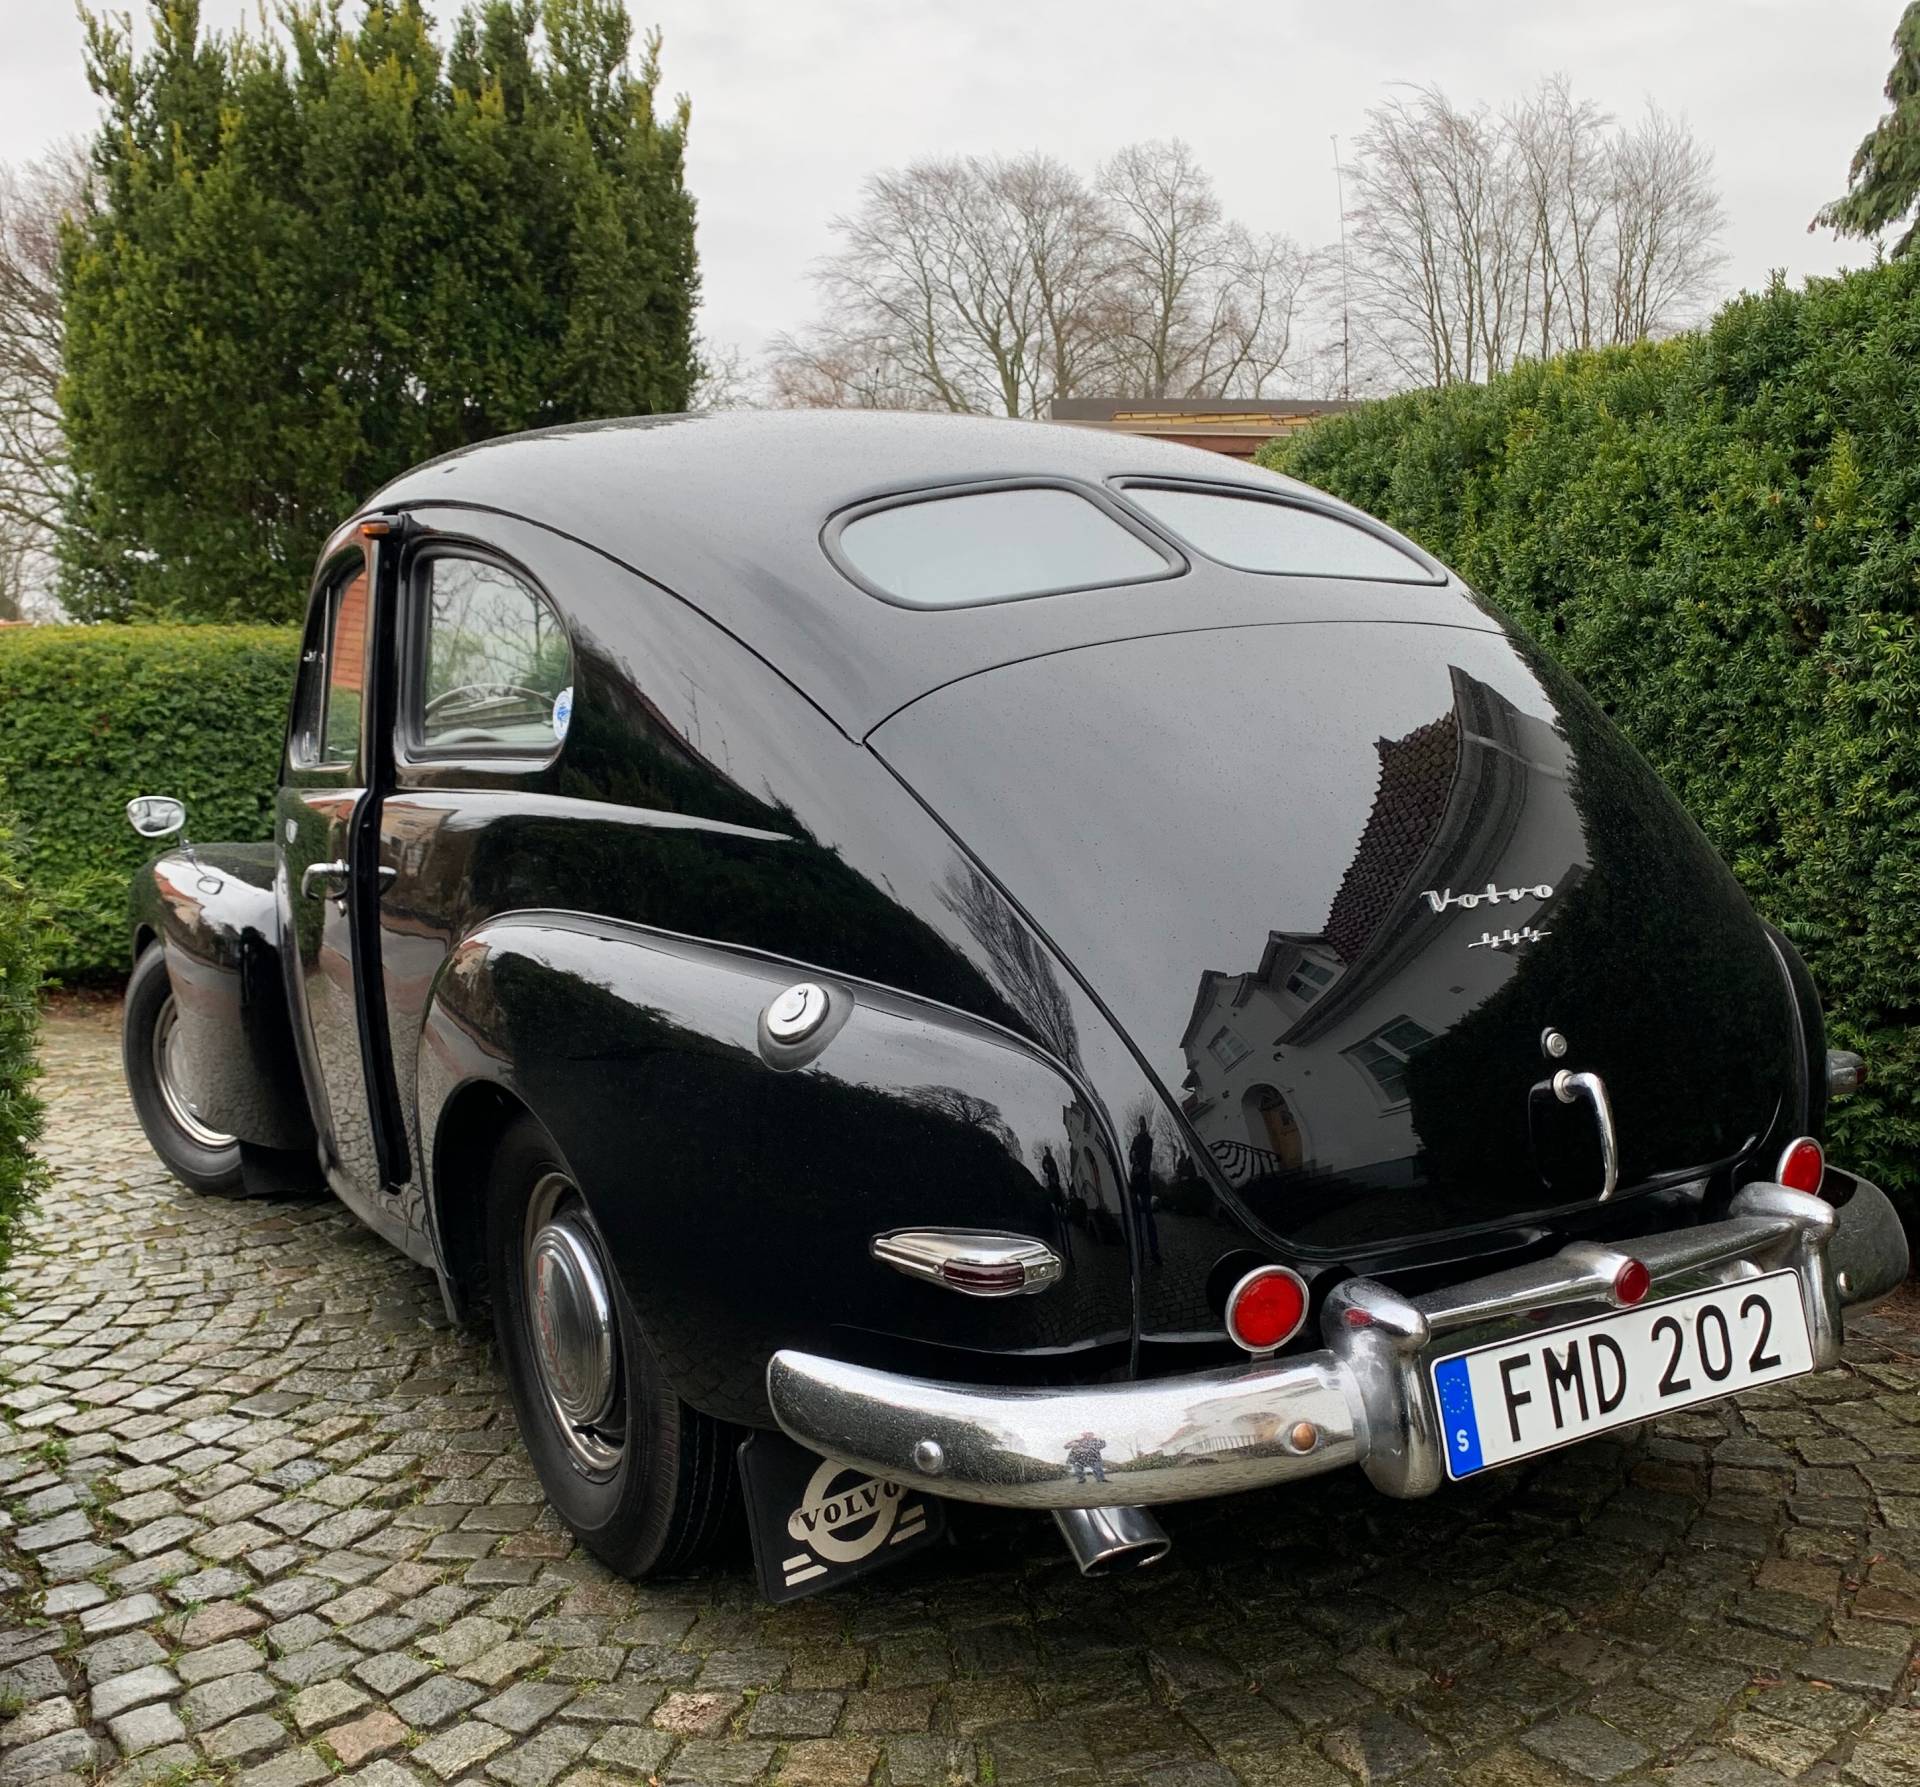 For Sale: Volvo PV 444 (1953) offered for GBP 14,526